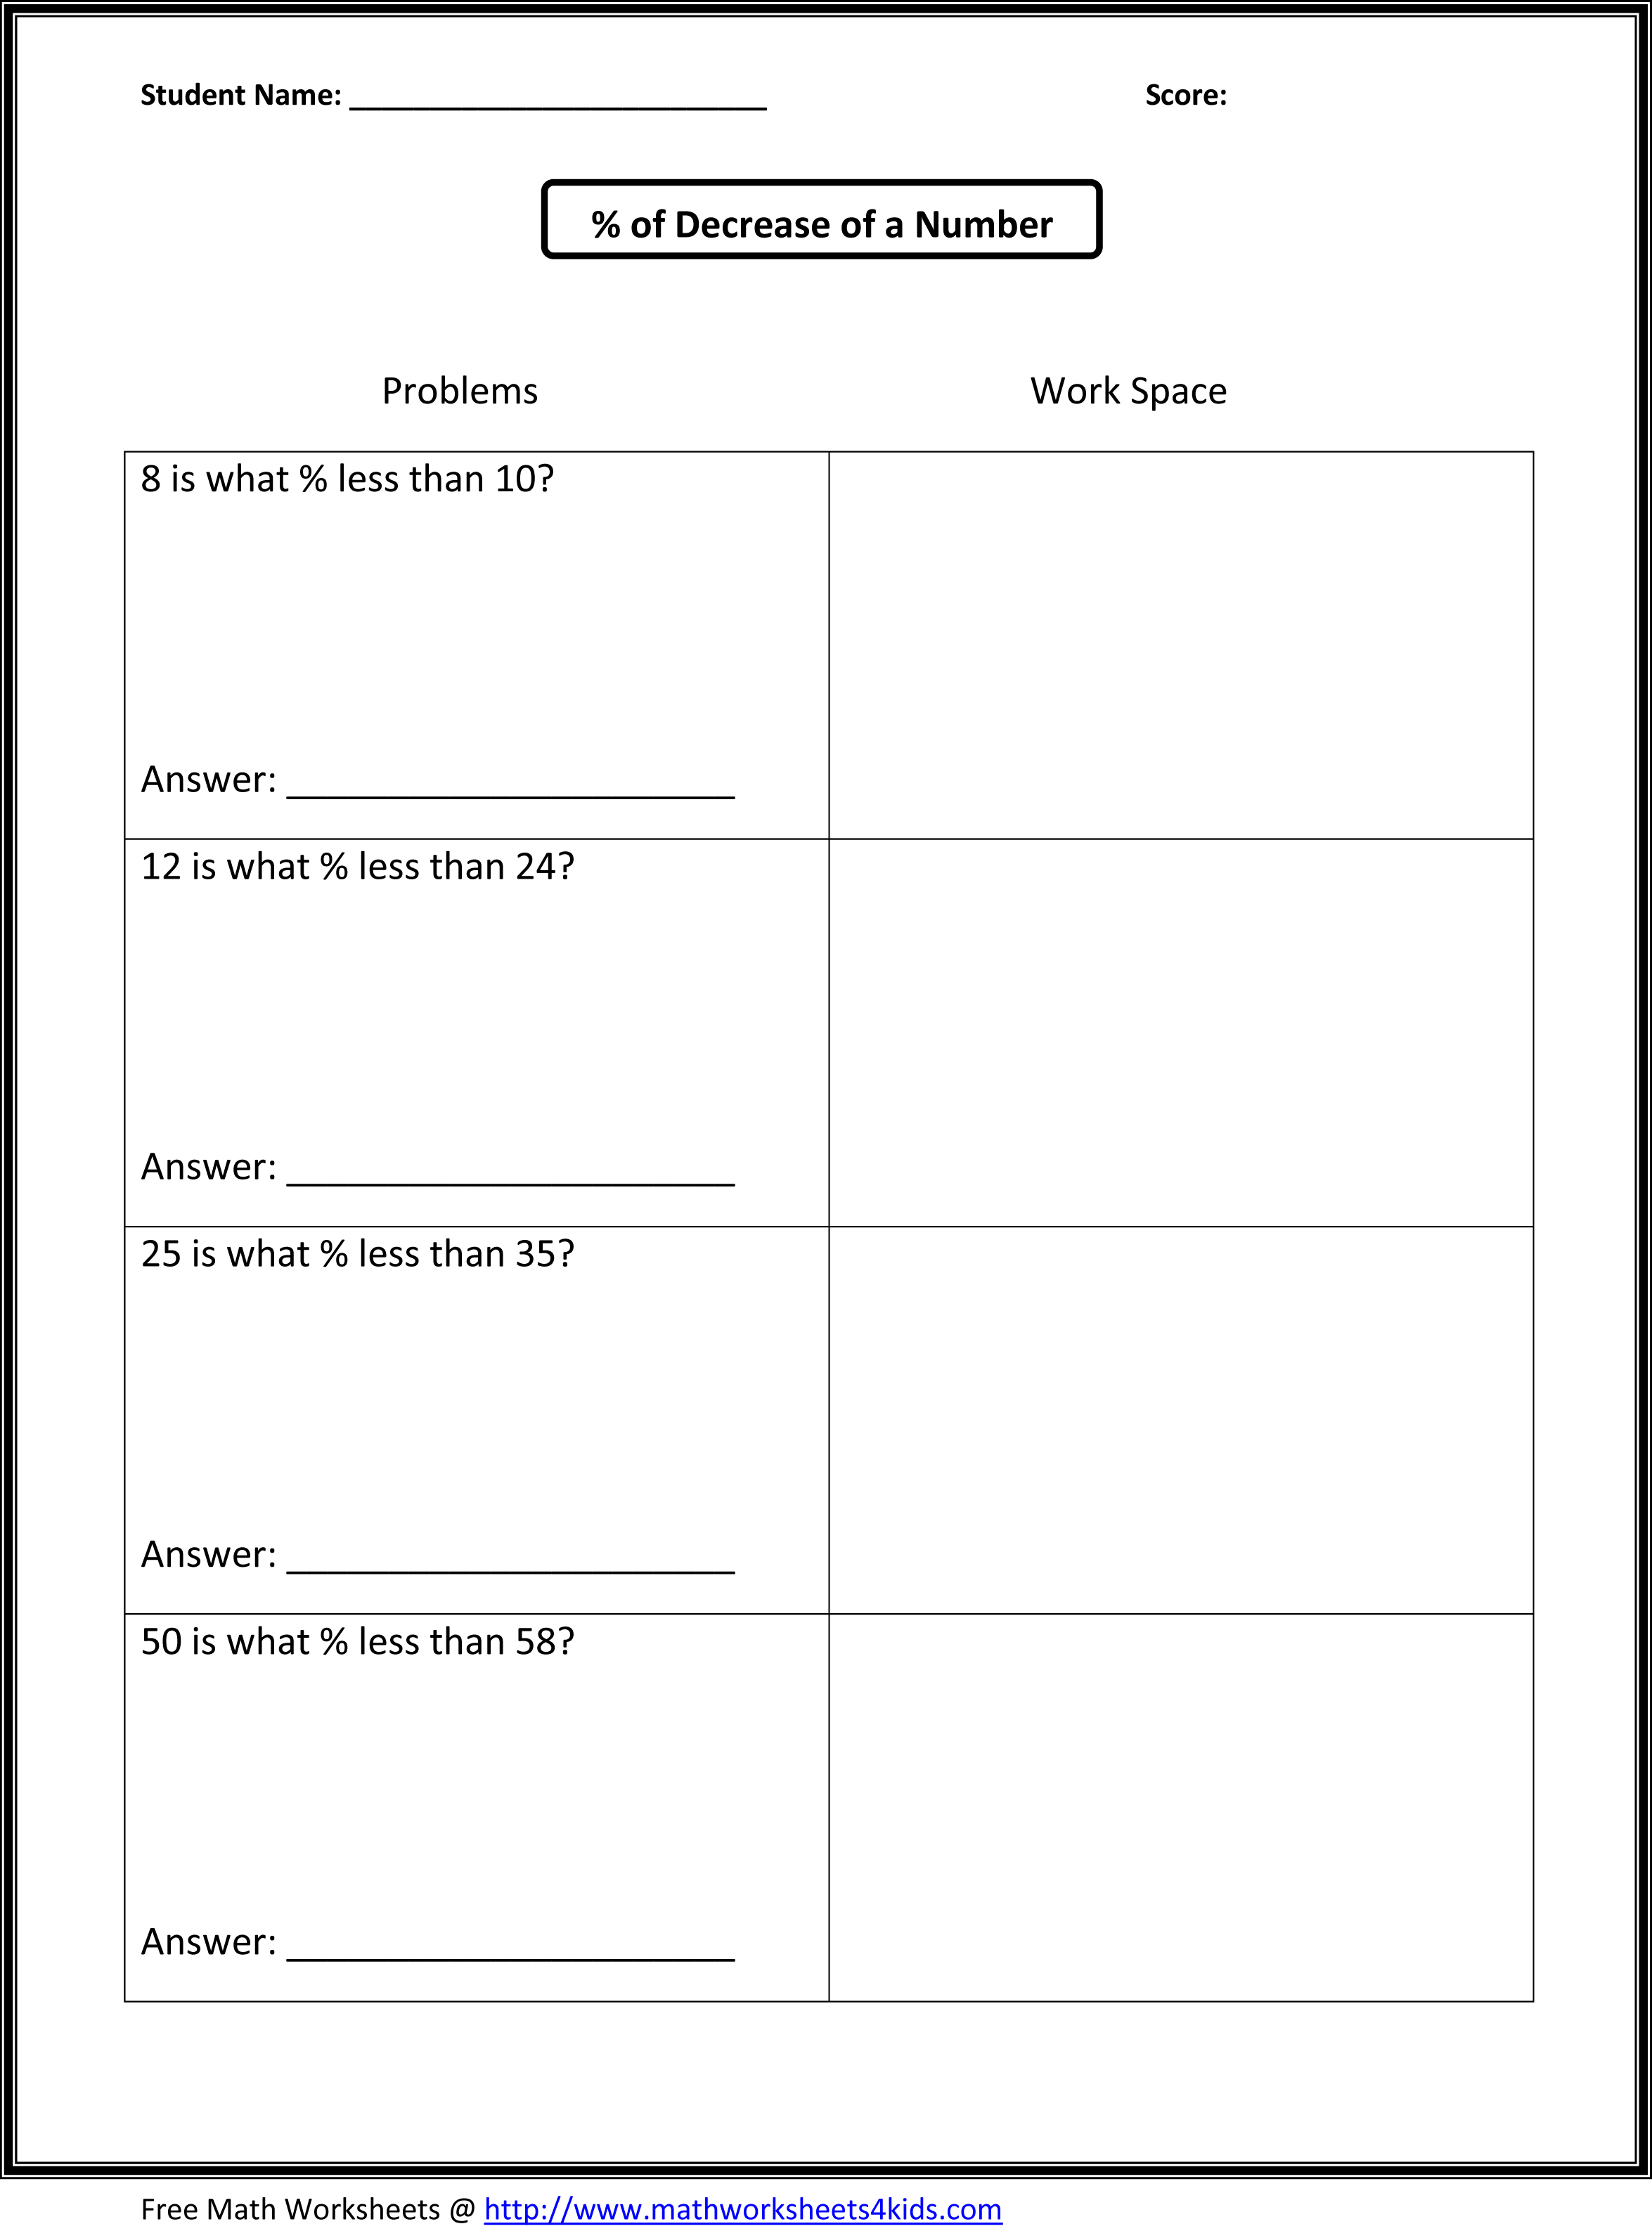 Ratios And Unit Rate - Lessons - Blendspace Regarding Unit Rate Word Problems Worksheet